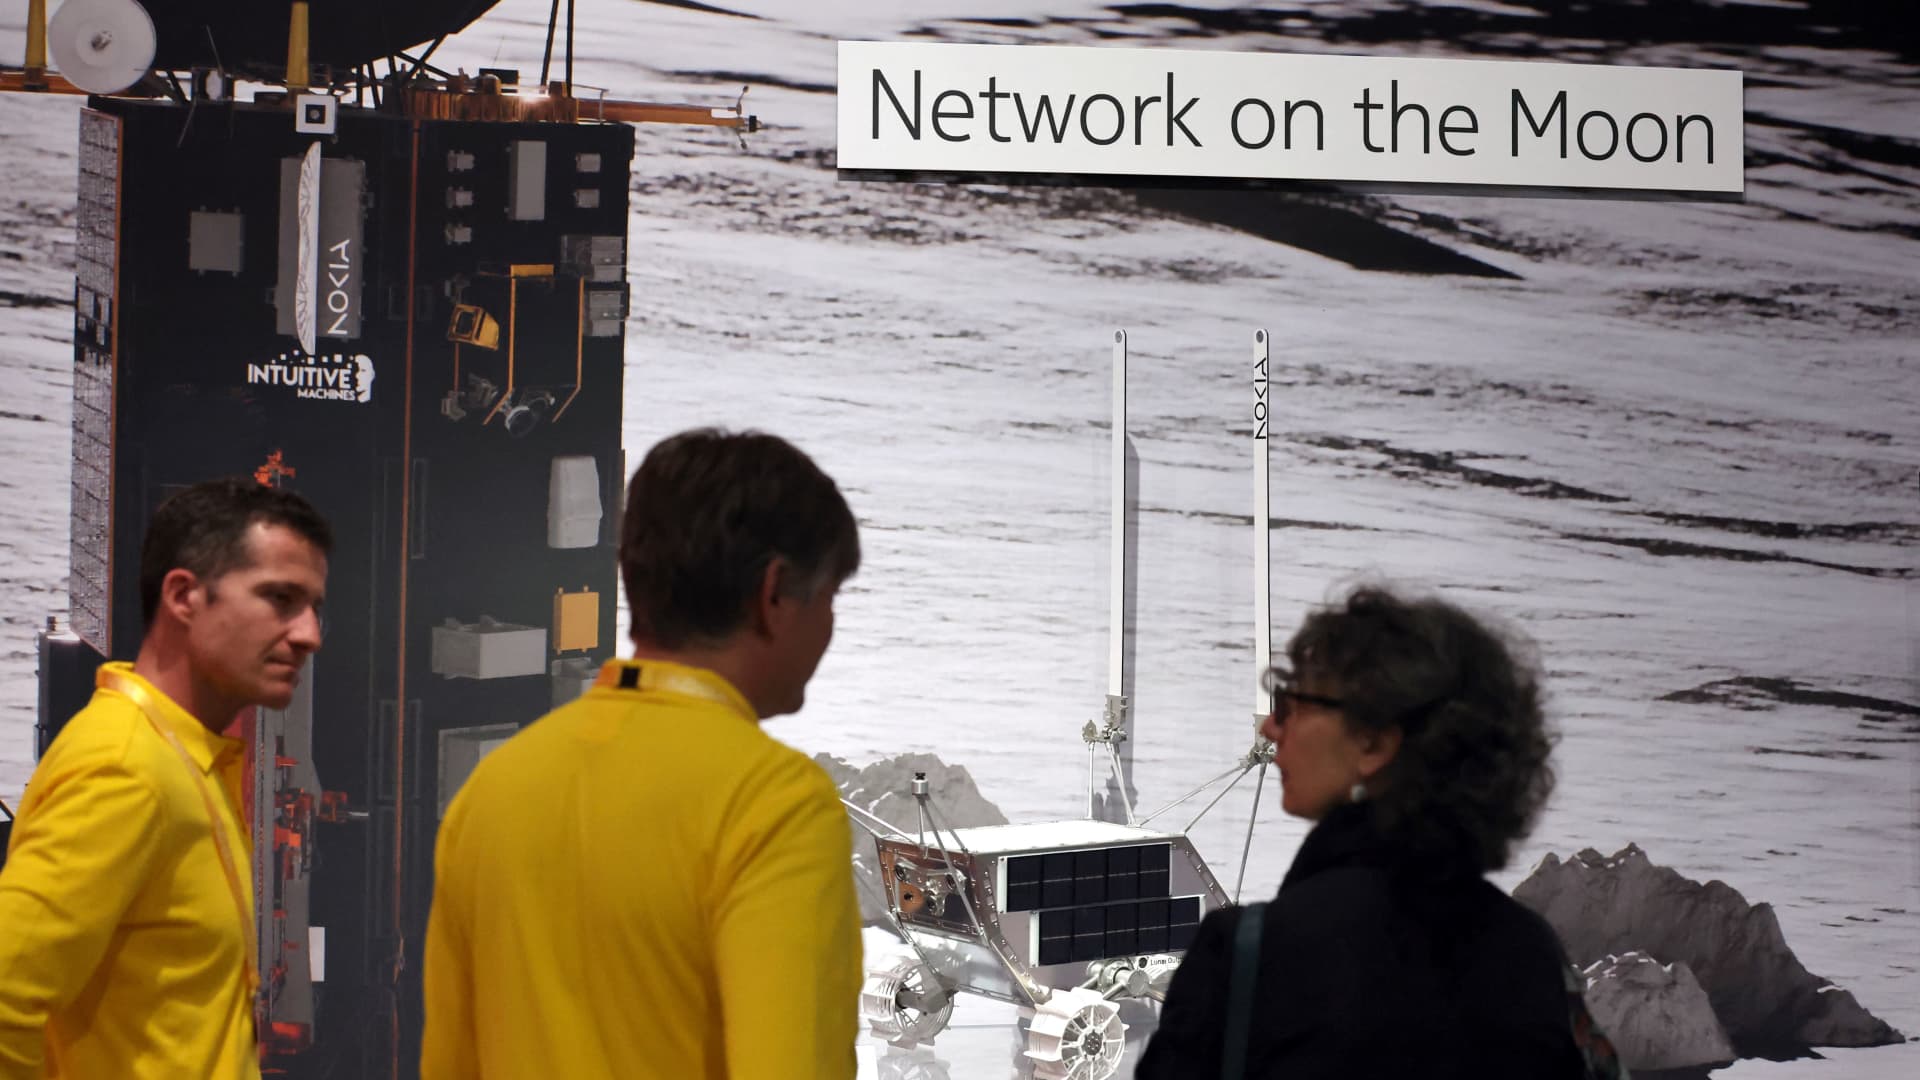 Photo of 4G internet is set to arrive on the moon later this year